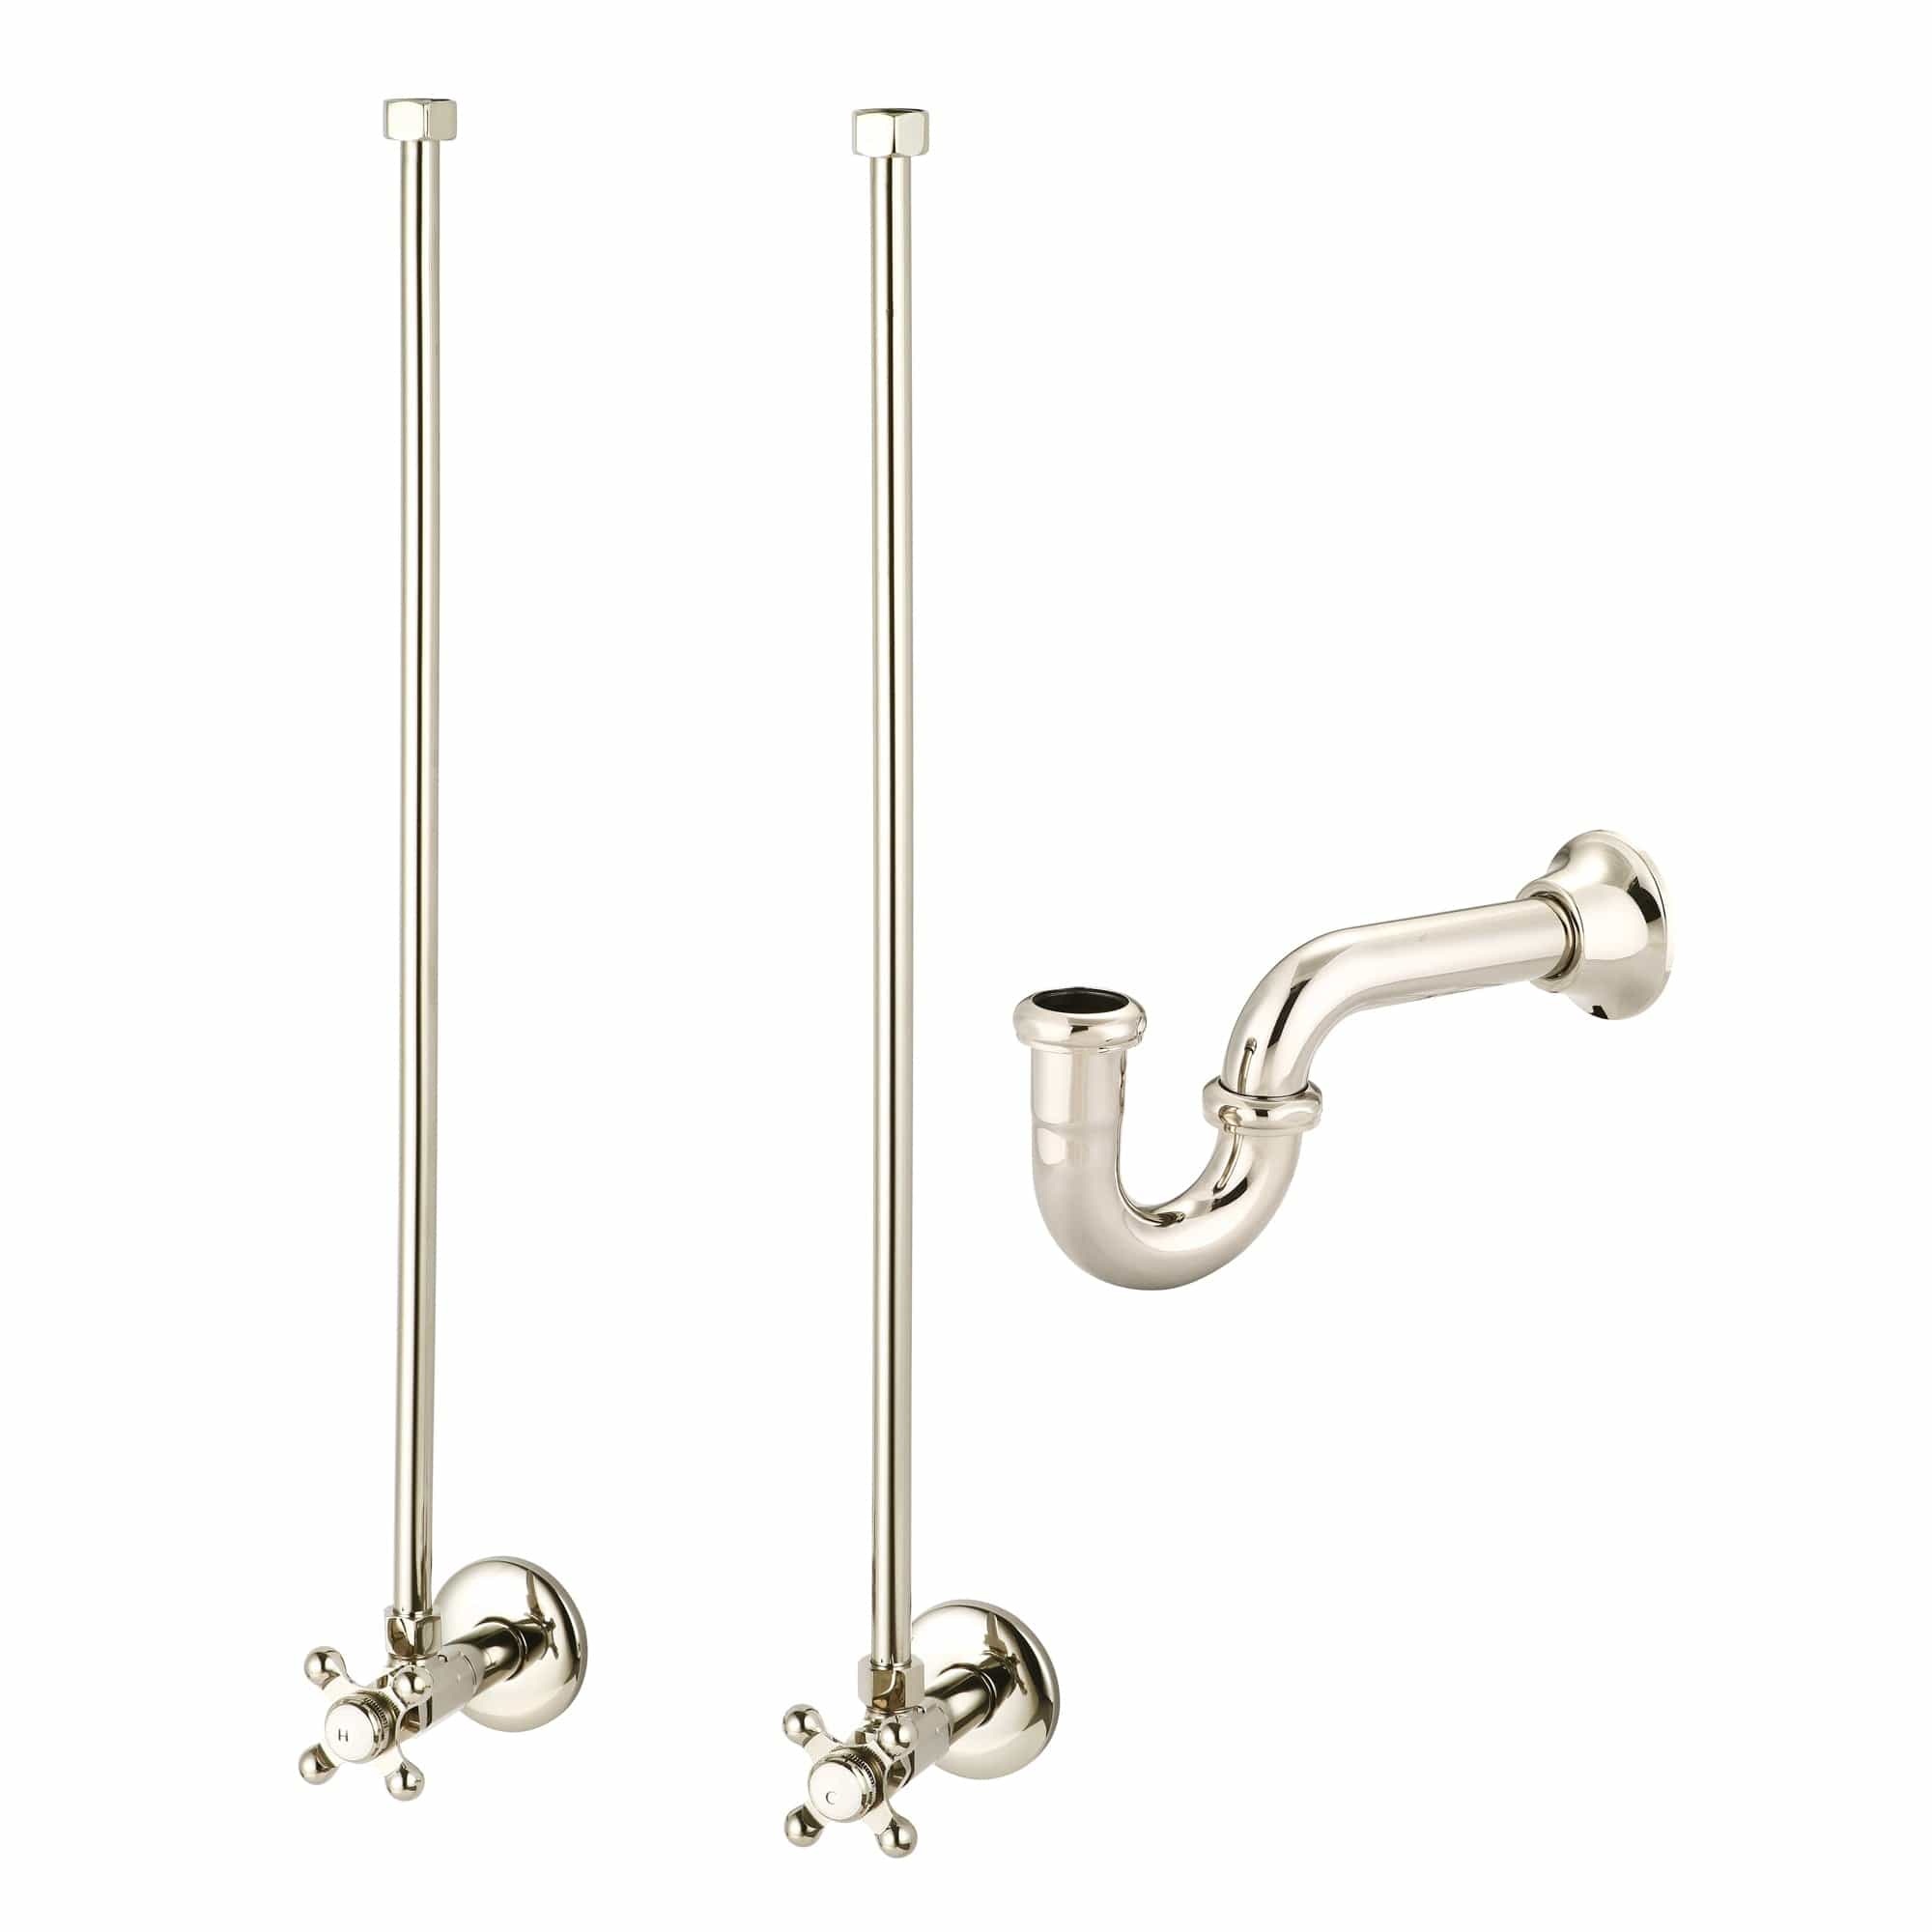 Empire 30 Inch Wide Single Wash Stand, P-Trap, Counter Top with Basin, F2-0009 Faucet and Mirror included in Polished Nickel (PVD) Finish - Molaix732030762695EP30E-0509